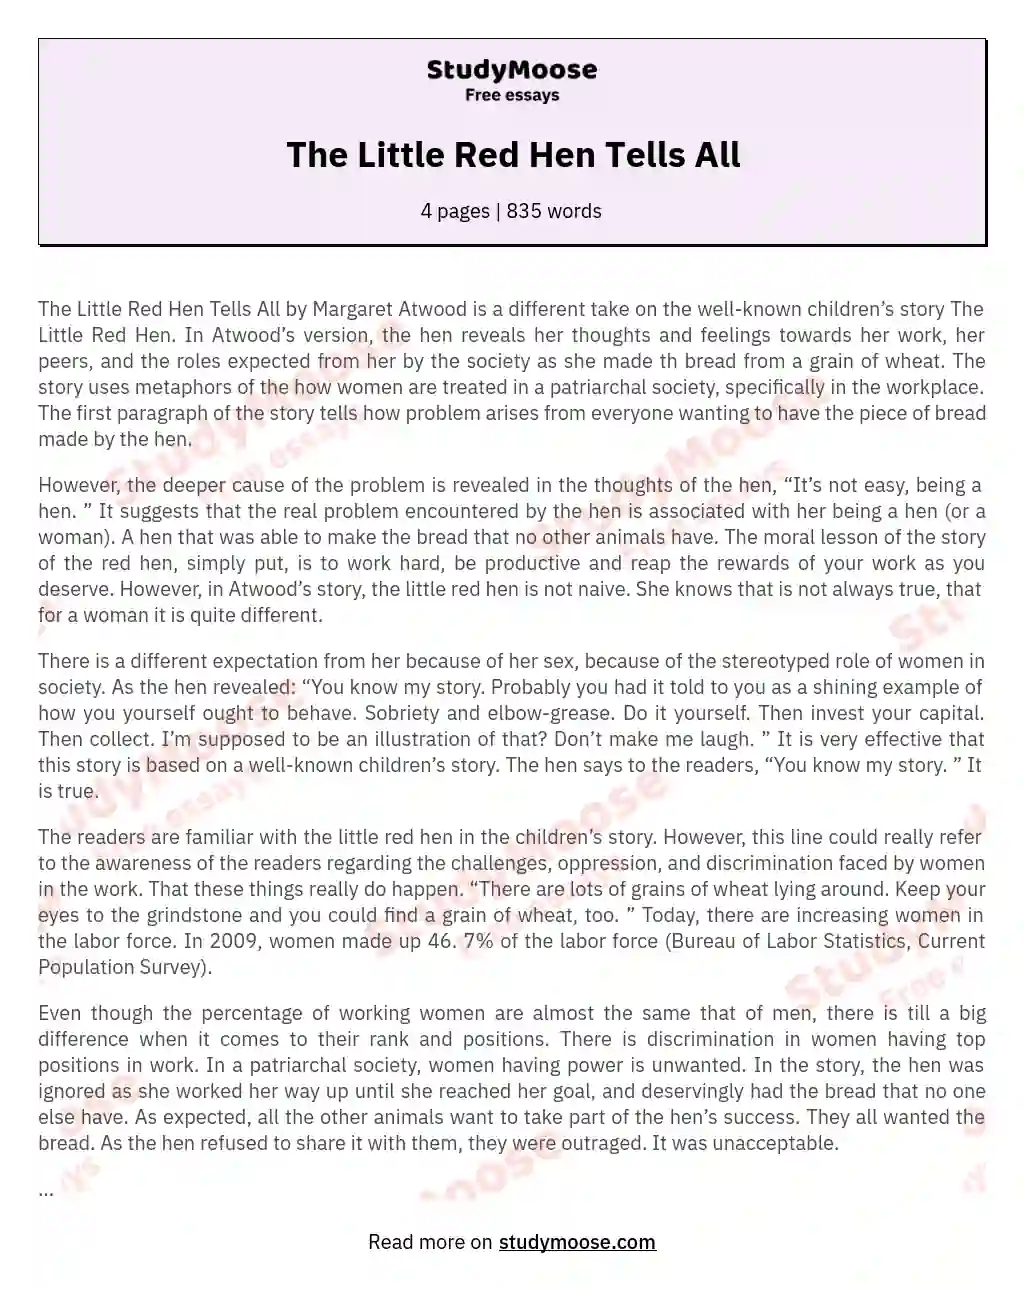 The Little Red Hen Tells All